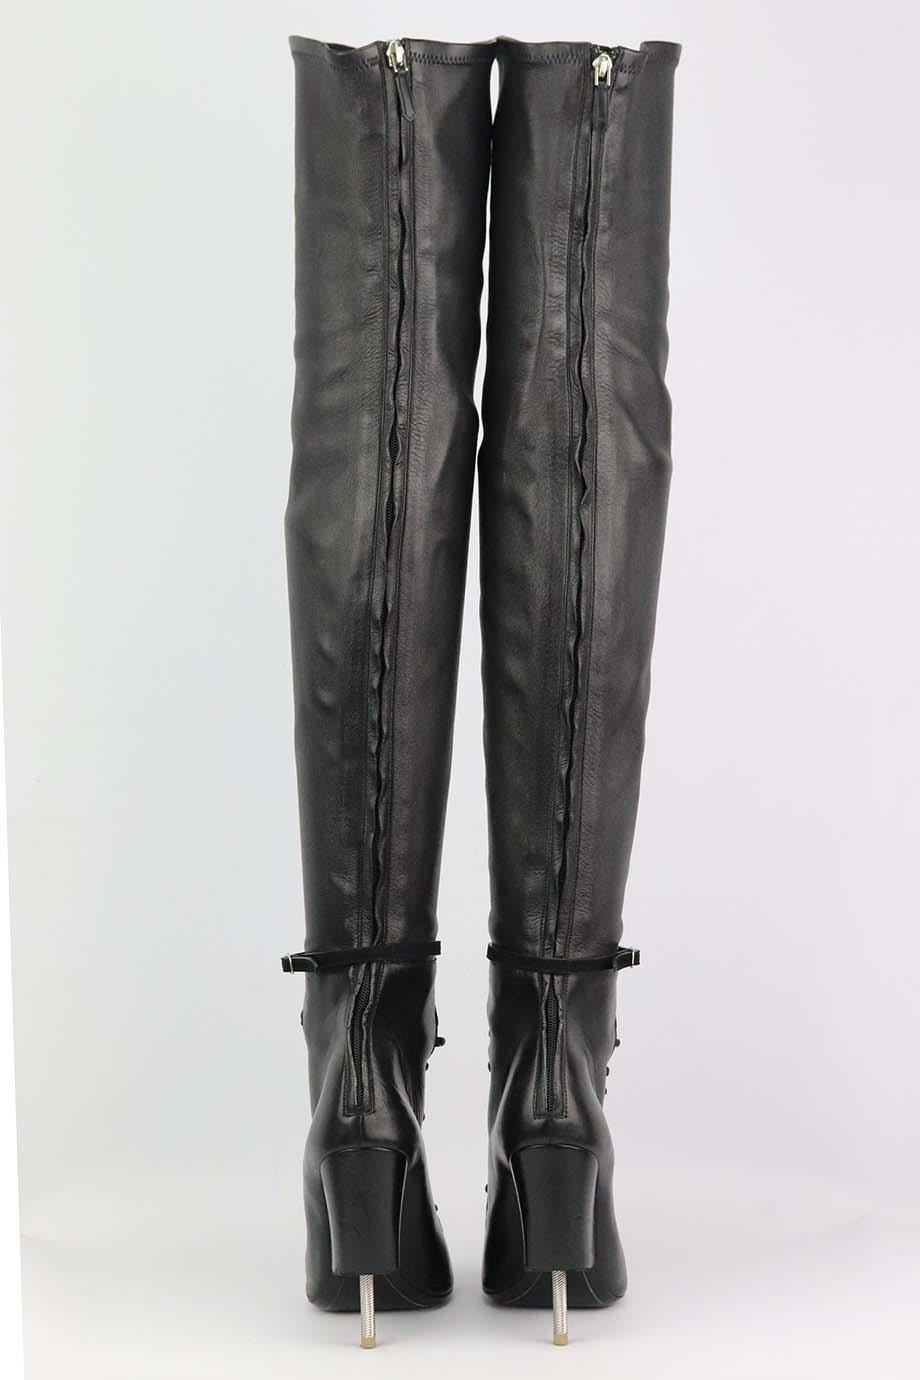 givenchy inspired boots